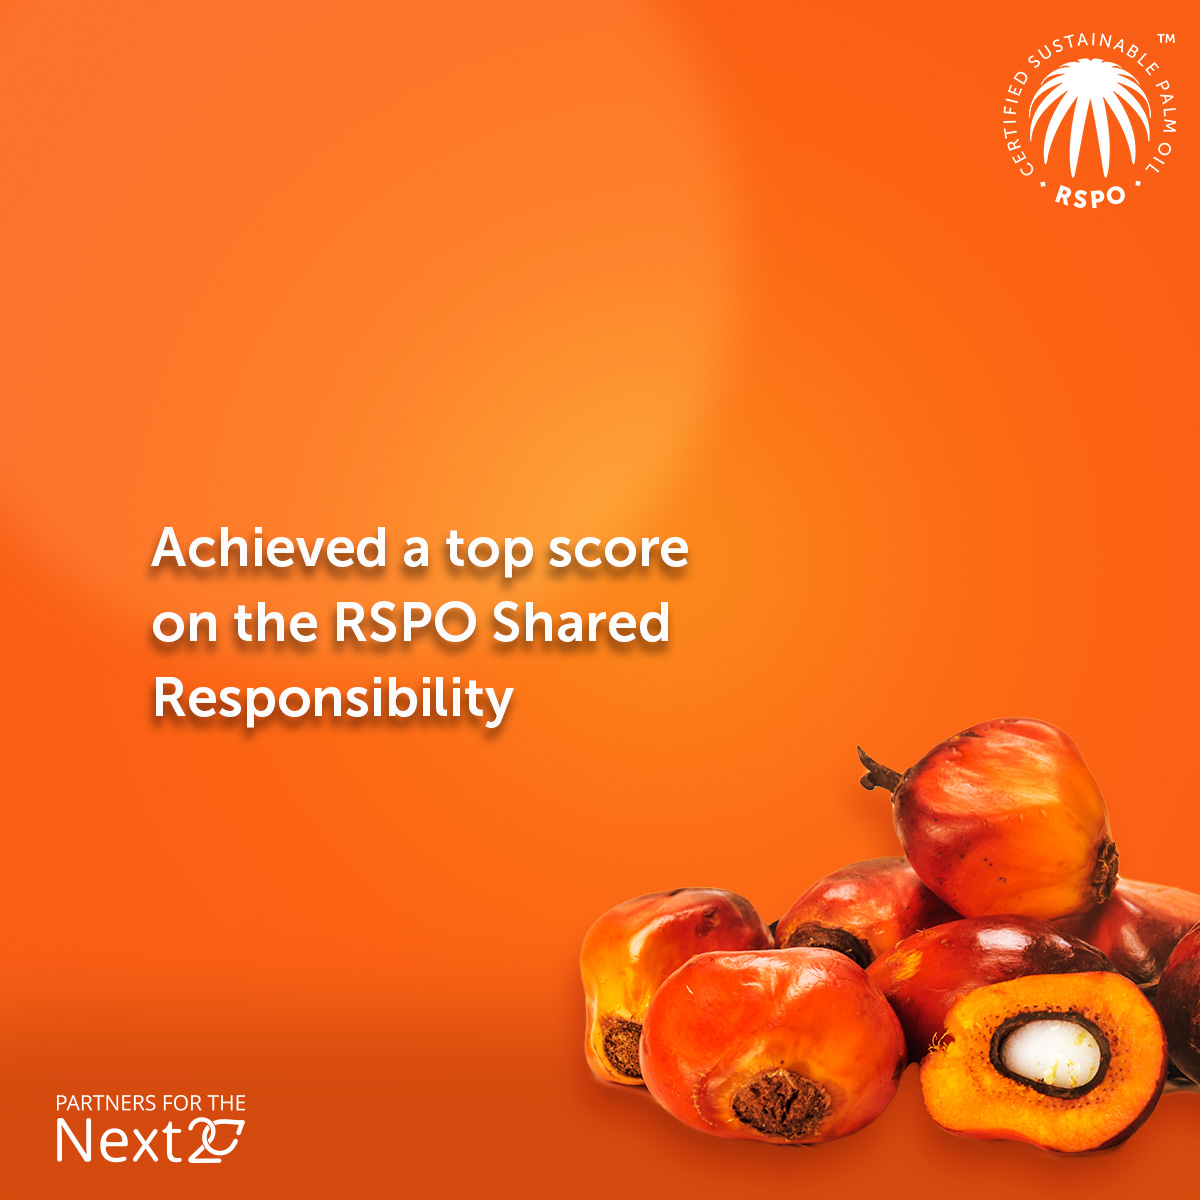 We are thrilled to announce that Nutreco has achieved an outstanding score of 9.7 on the RSPO Shared Responsibility Scorecard! From 1, 866 companies that have been scored, we are part of the group of 68 companies with a score over 8.5. brnw.ch/21wD3OL